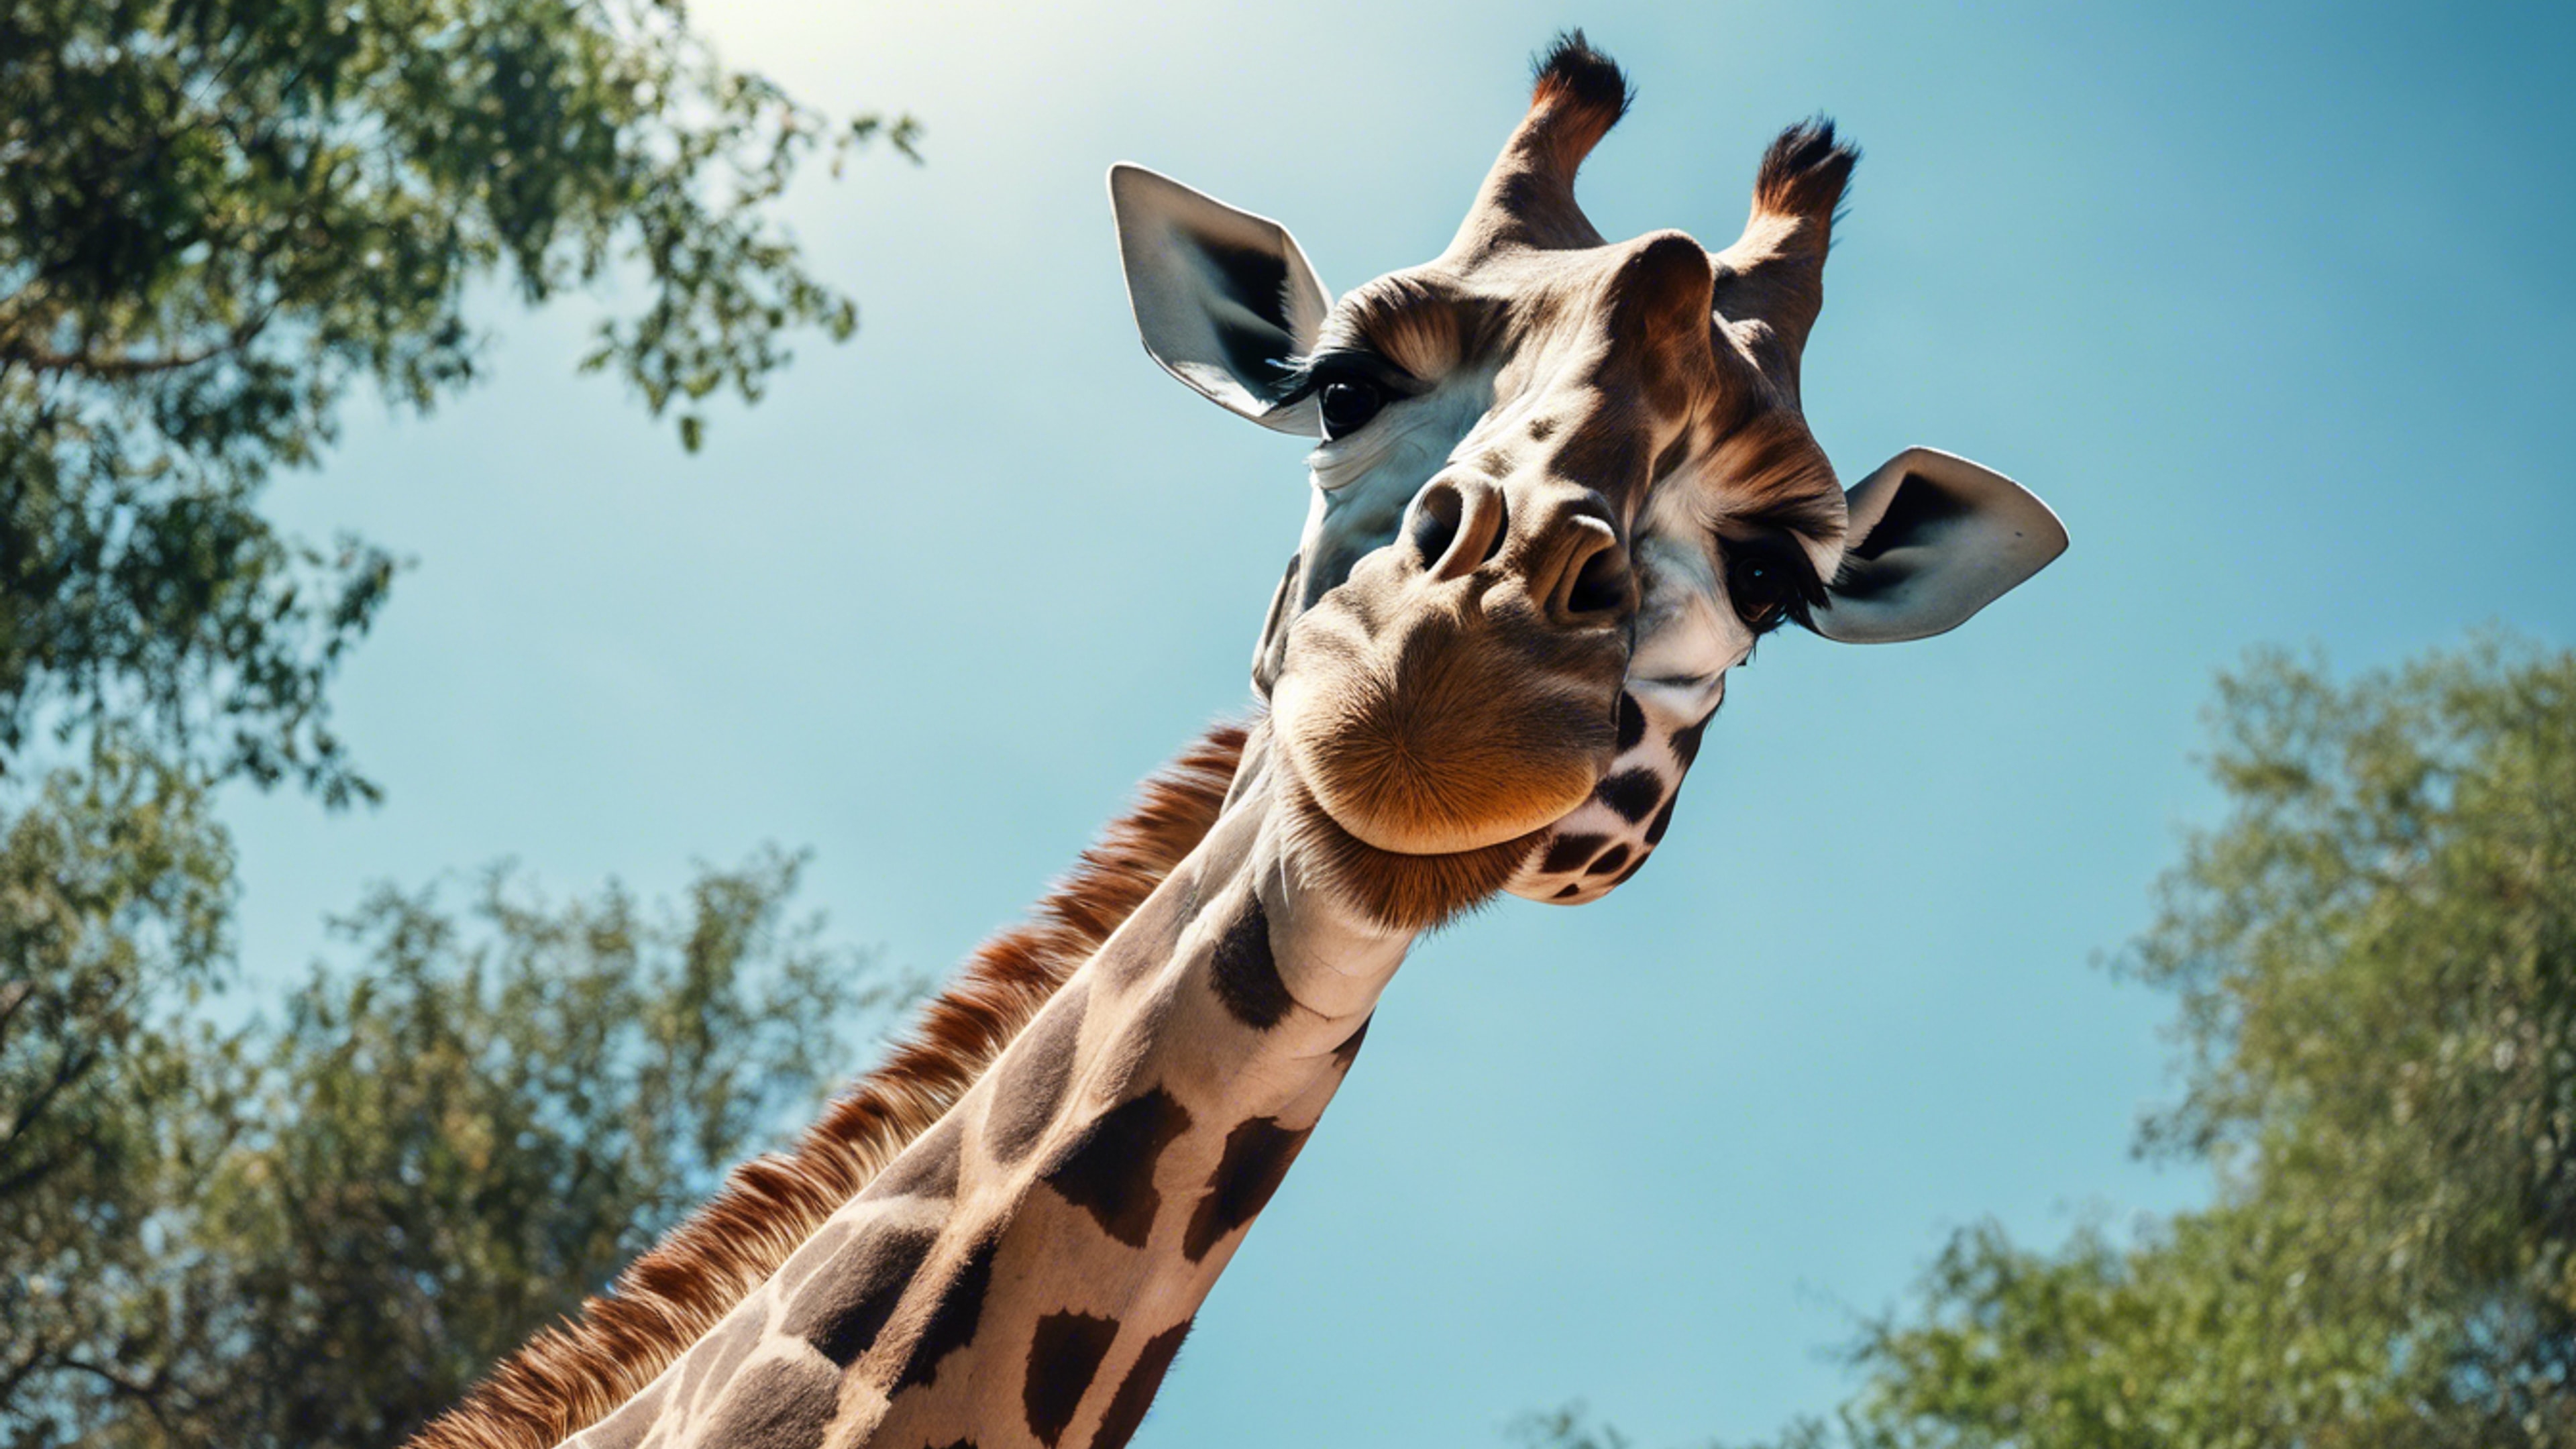 A picture from a below angle showing the towering magnificence of a giraffe against a clear blue sky. 벽지[8a88956d9aa2483bb204]